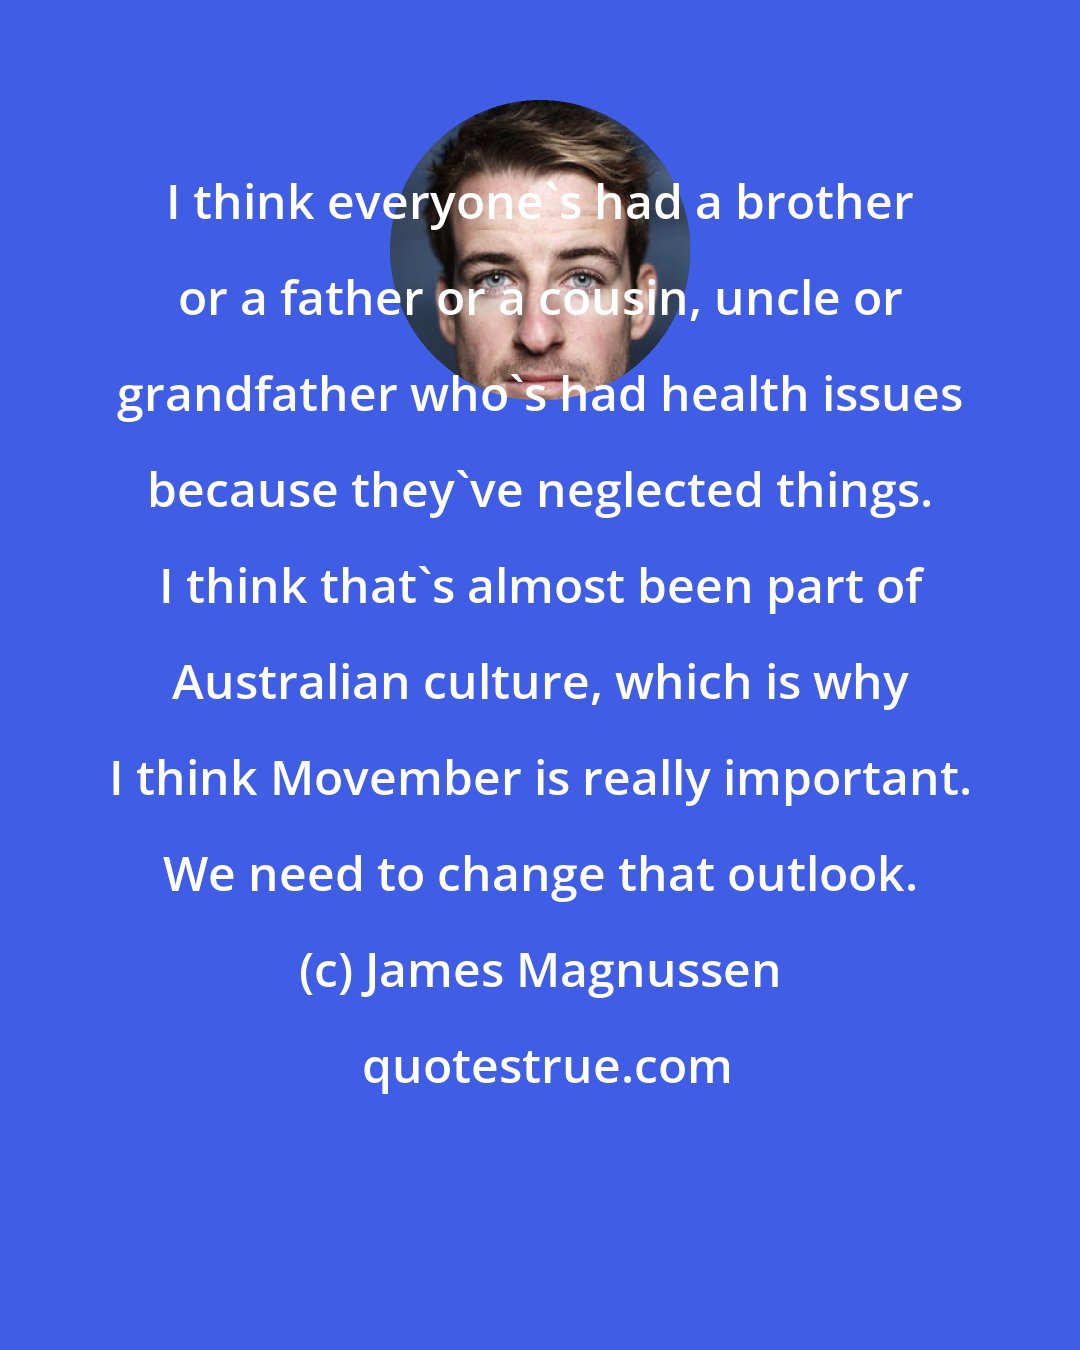 James Magnussen: I think everyone's had a brother or a father or a cousin, uncle or grandfather who's had health issues because they've neglected things. I think that's almost been part of Australian culture, which is why I think Movember is really important. We need to change that outlook.